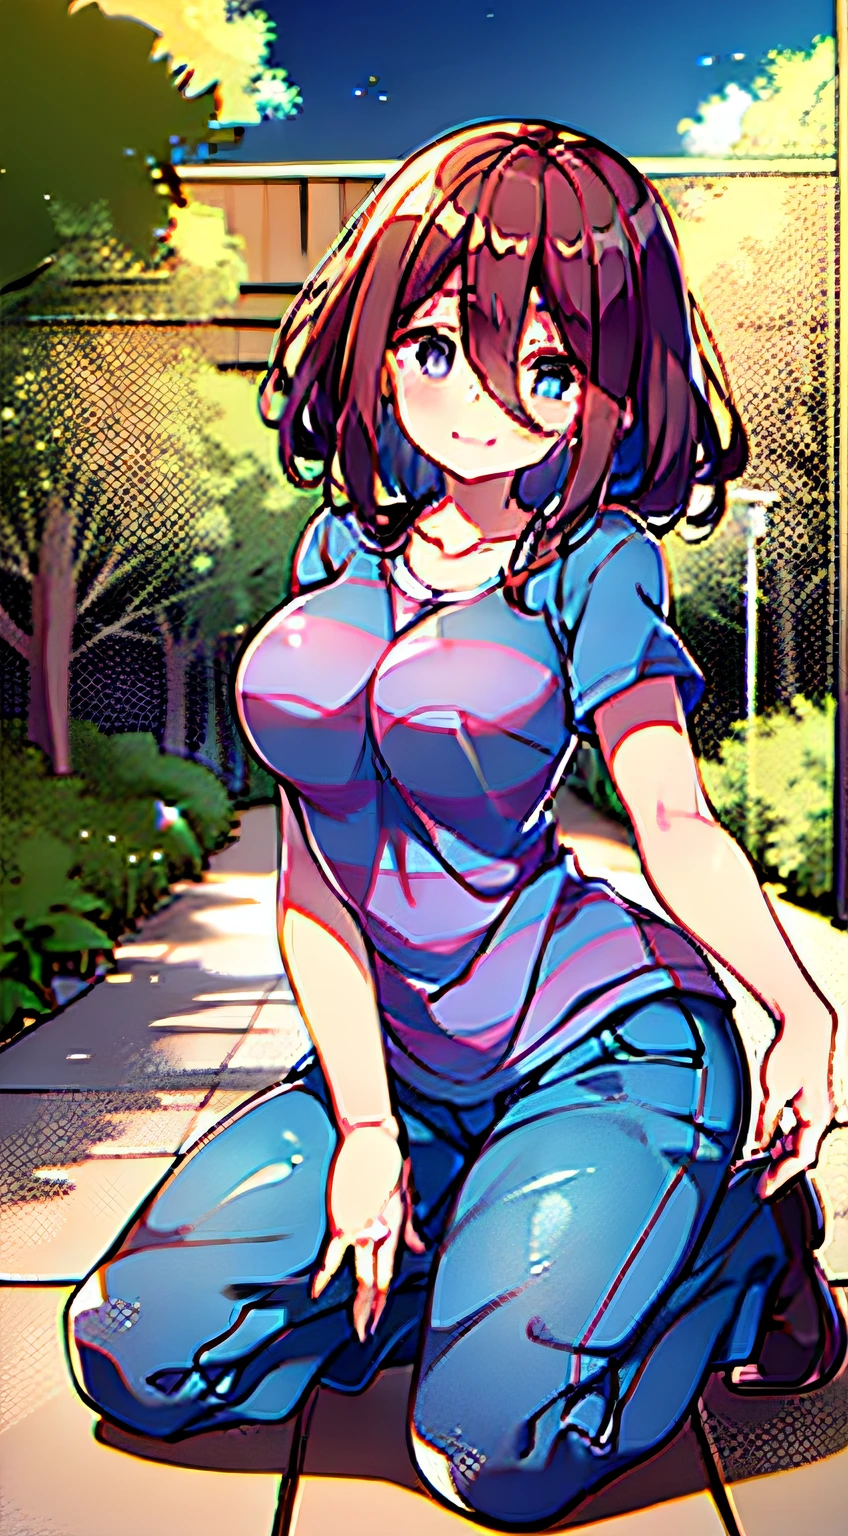 masterpiece, The best quality, High Resolutions, Fresh, (brown shorts), (blue shirt), (1girl), (Alone), Stripes, camisa a Stripes moradas, smiling, Standing, blue eyes, big chest, kneeling, ecchi